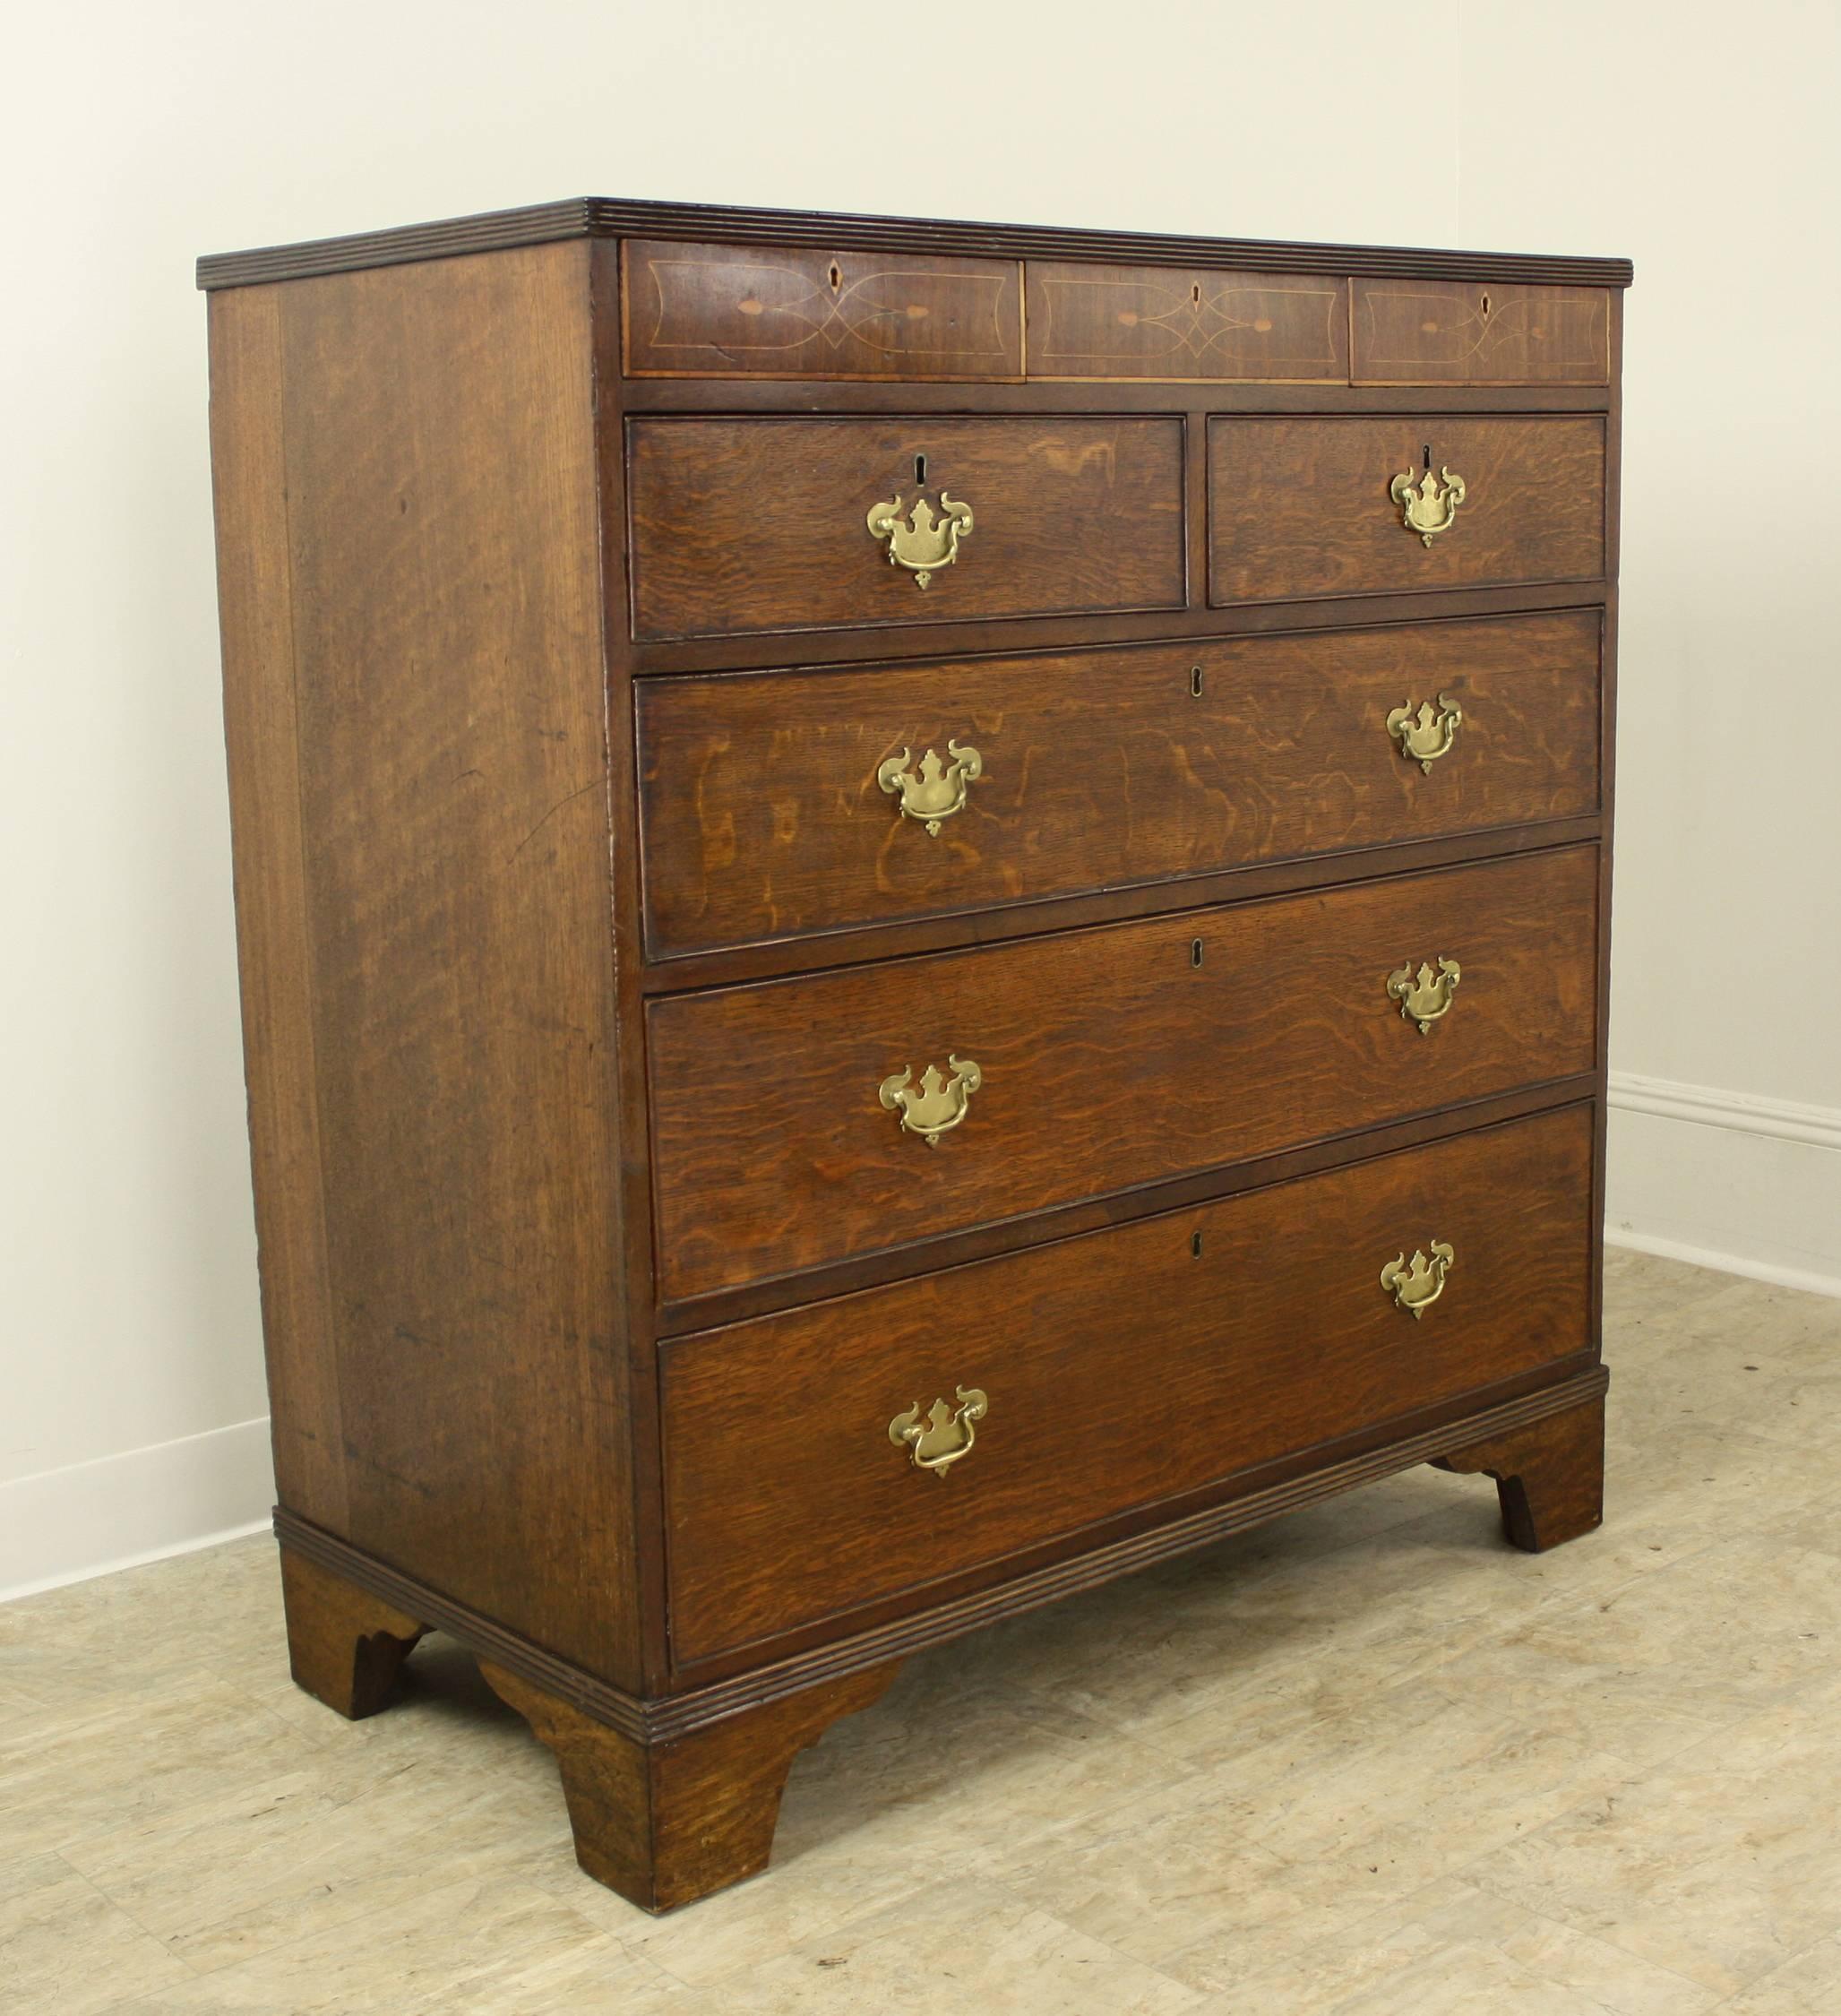 This bureau is a very fine, very early example of a classic English chest, but it has an added magical inlay pattern on the frieze. Please look at the fourth thumbnail for a close-up of an amazing work of marquetry, done in a formal, yet whimsical